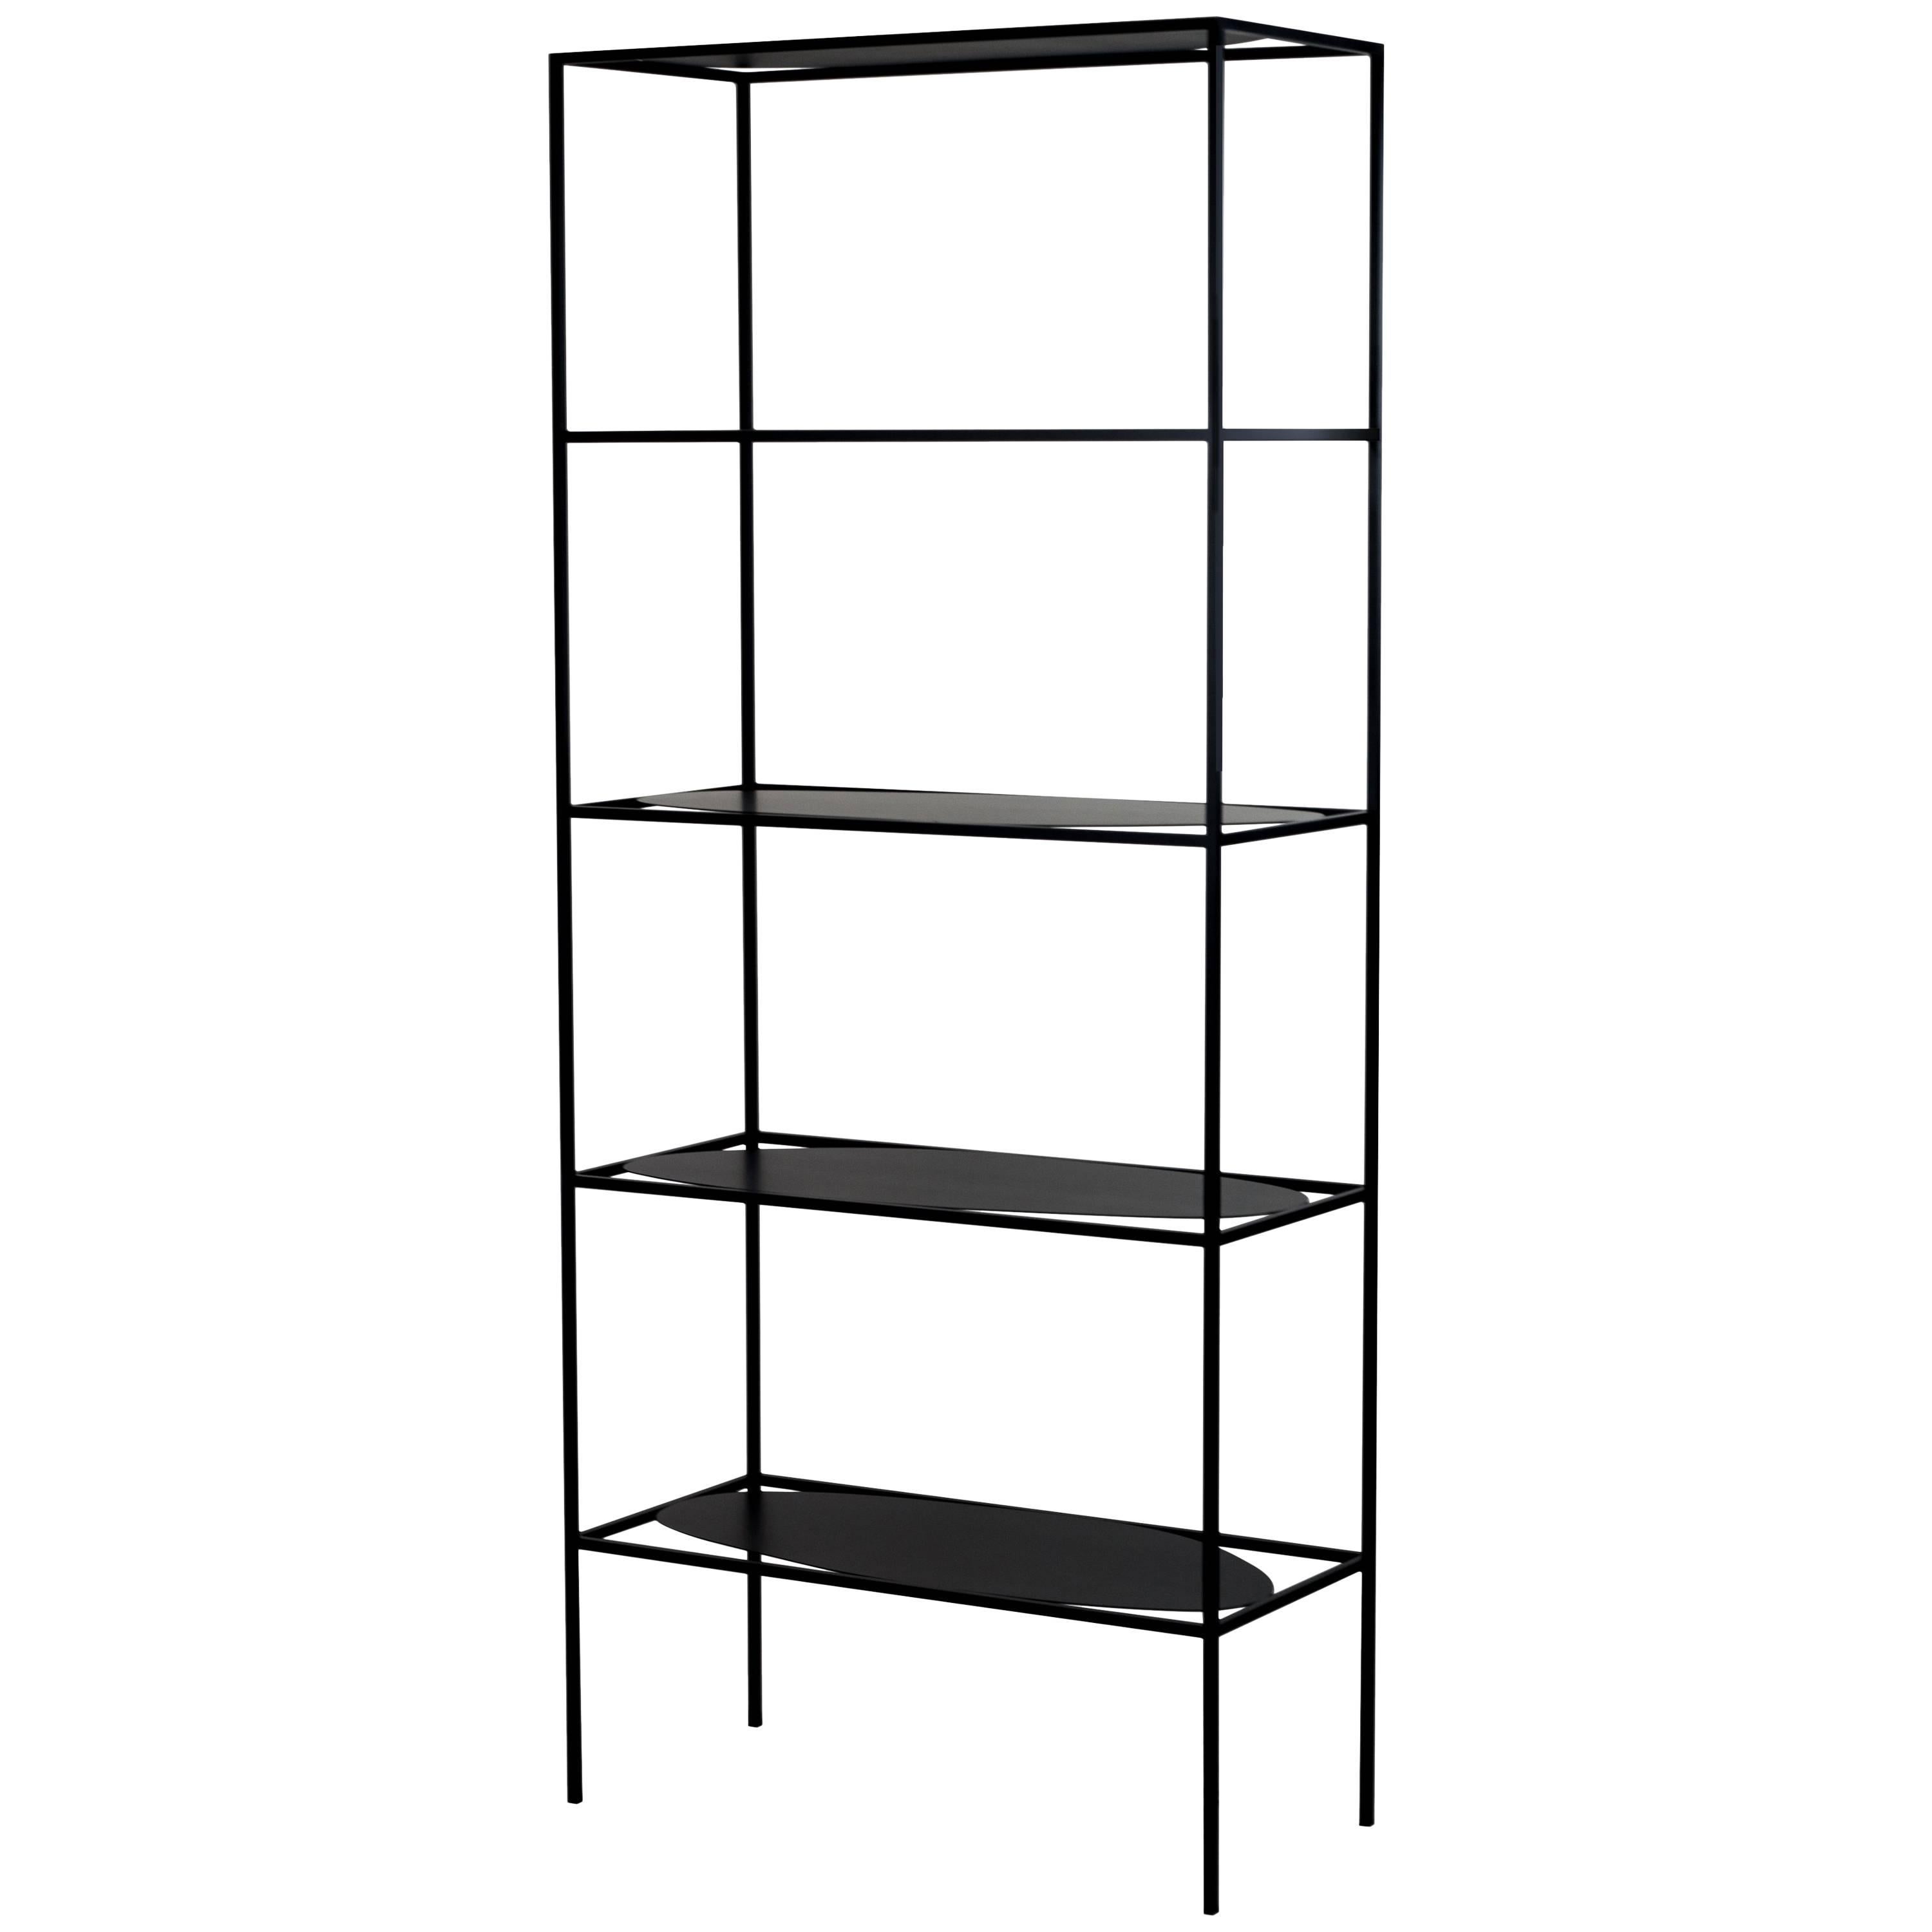 The contemporary modern Black Steel Ahn etagere is a study in positive and negative space. With its five different asymmetrical and organic surfaces, Ahn is a minimal sculpture in its own right, playing with balance and tension between the shelves